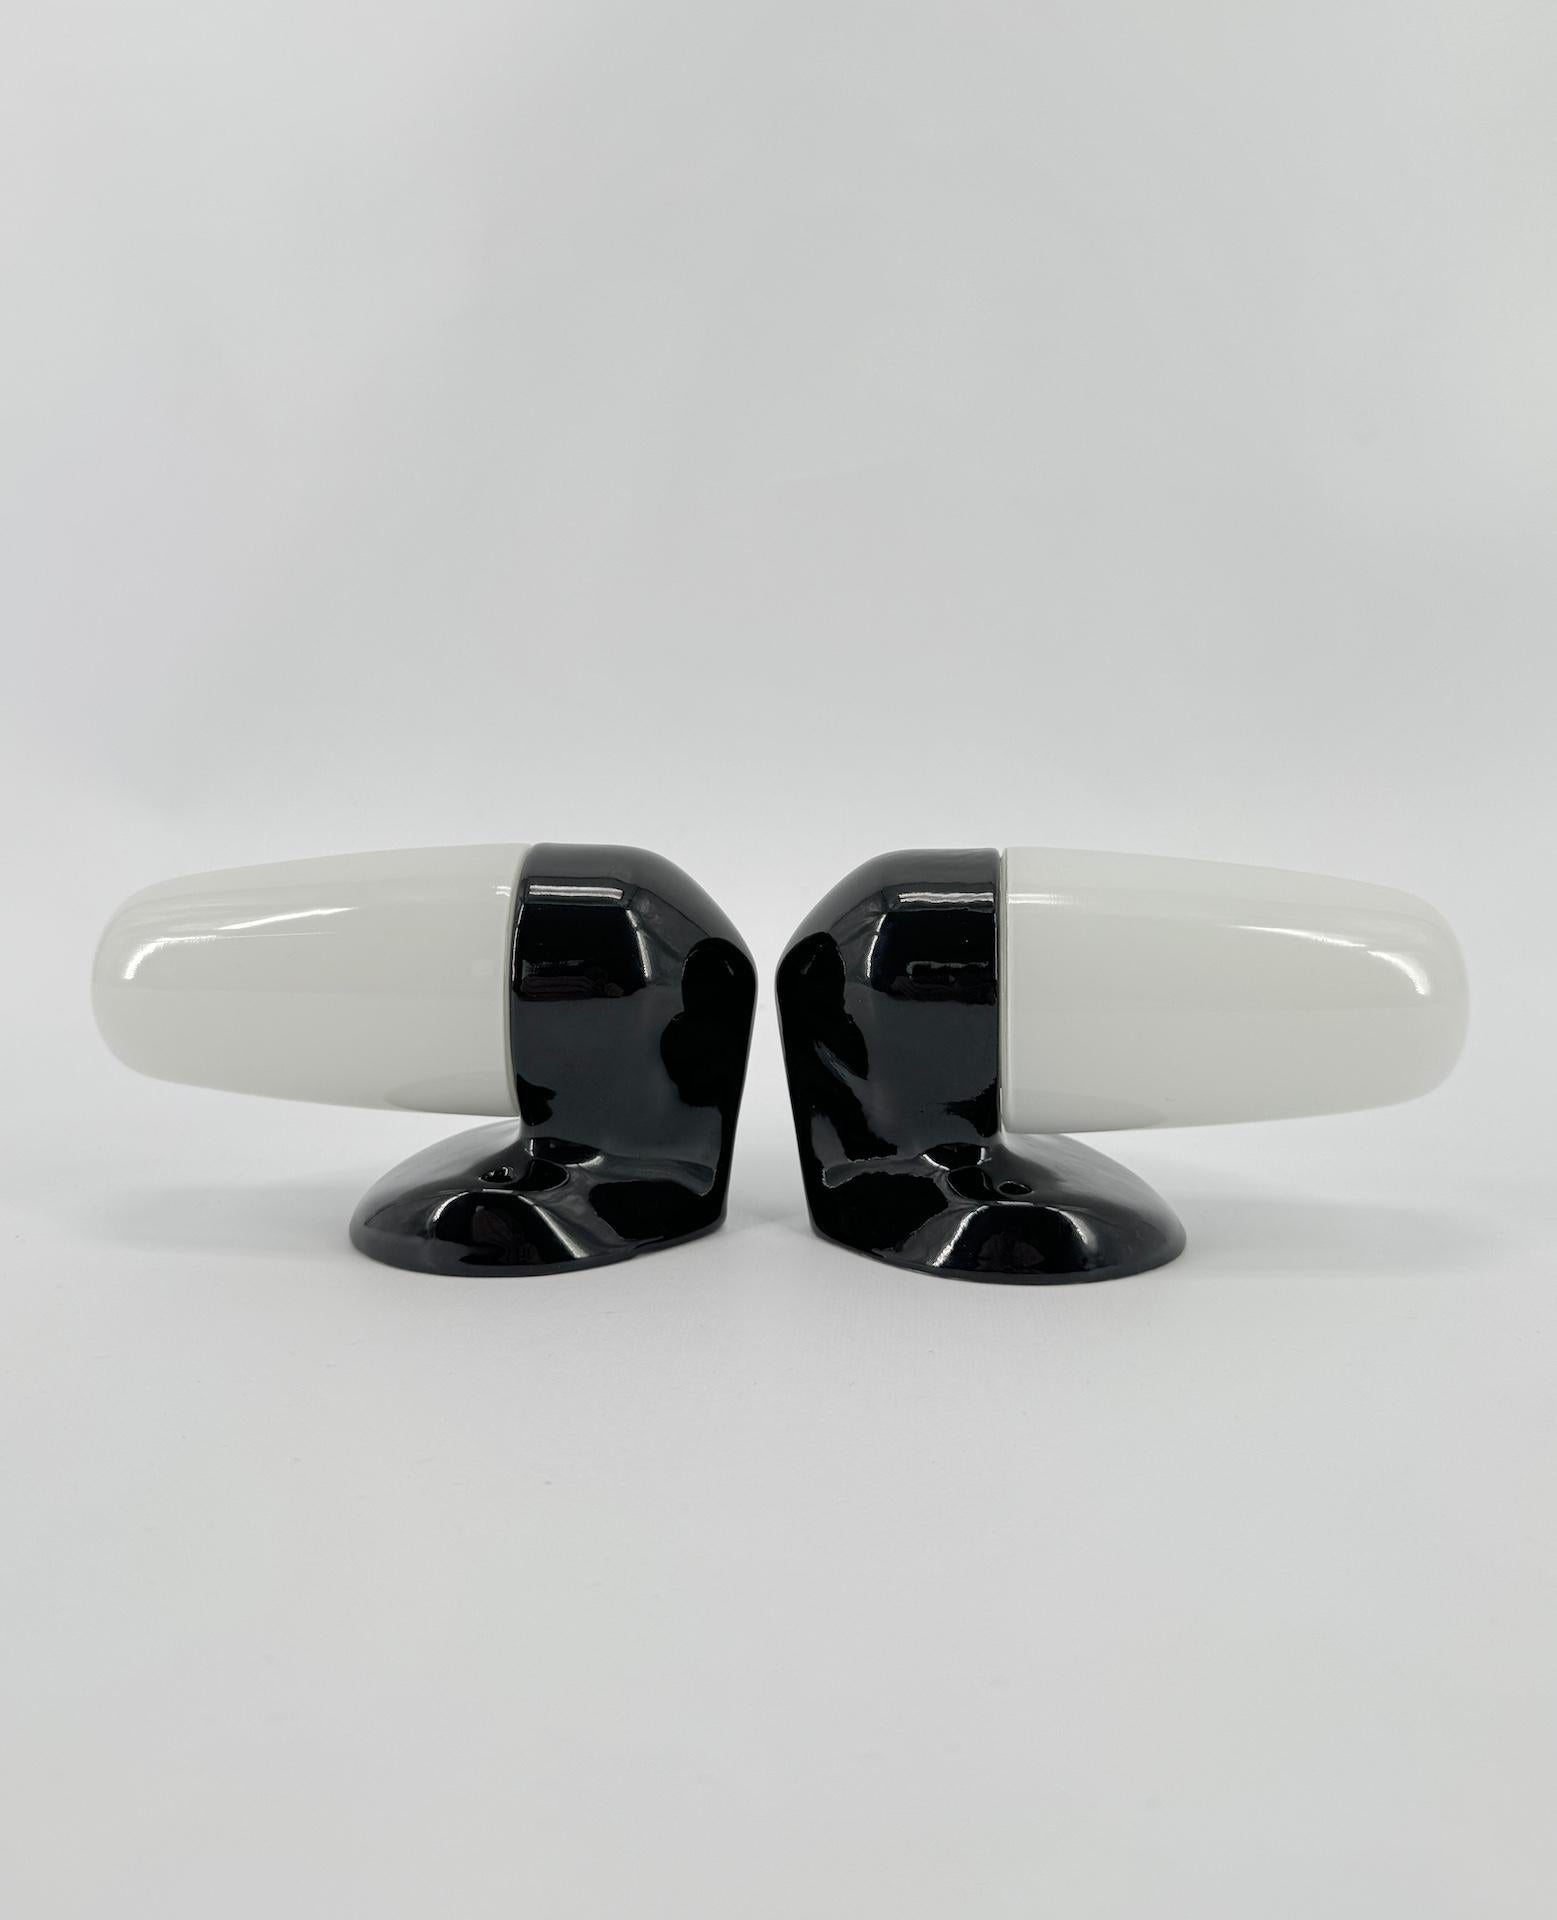 Wall light in black porcelain and opaline glass shades designed by the German designer Wilhelm Wagenfeld, who studied at the Bauhaus school. 

This model dates from 1958 with sleek, round and elegant lines, a timeless design that will look equally